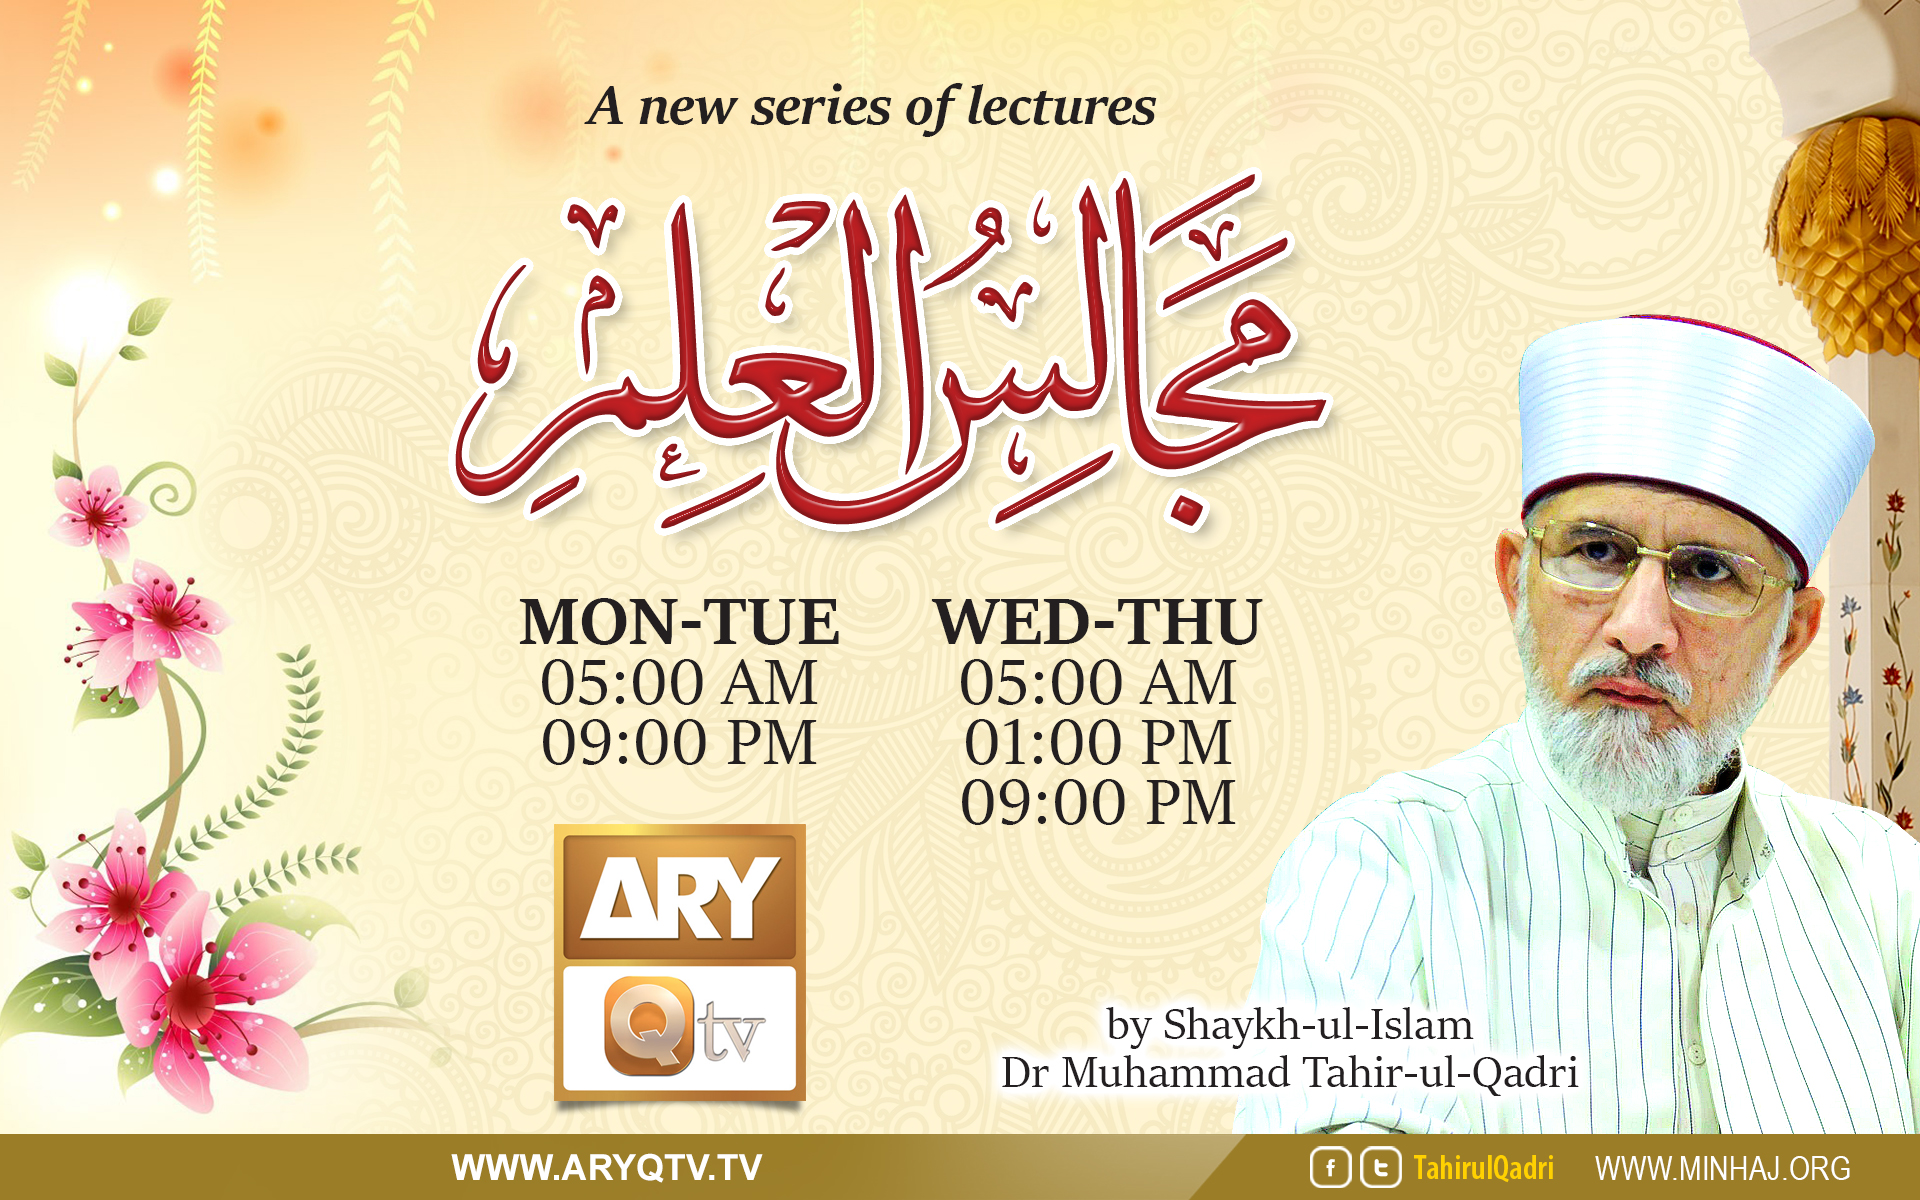 Watch ARY QTV: A New Series of Lectures 